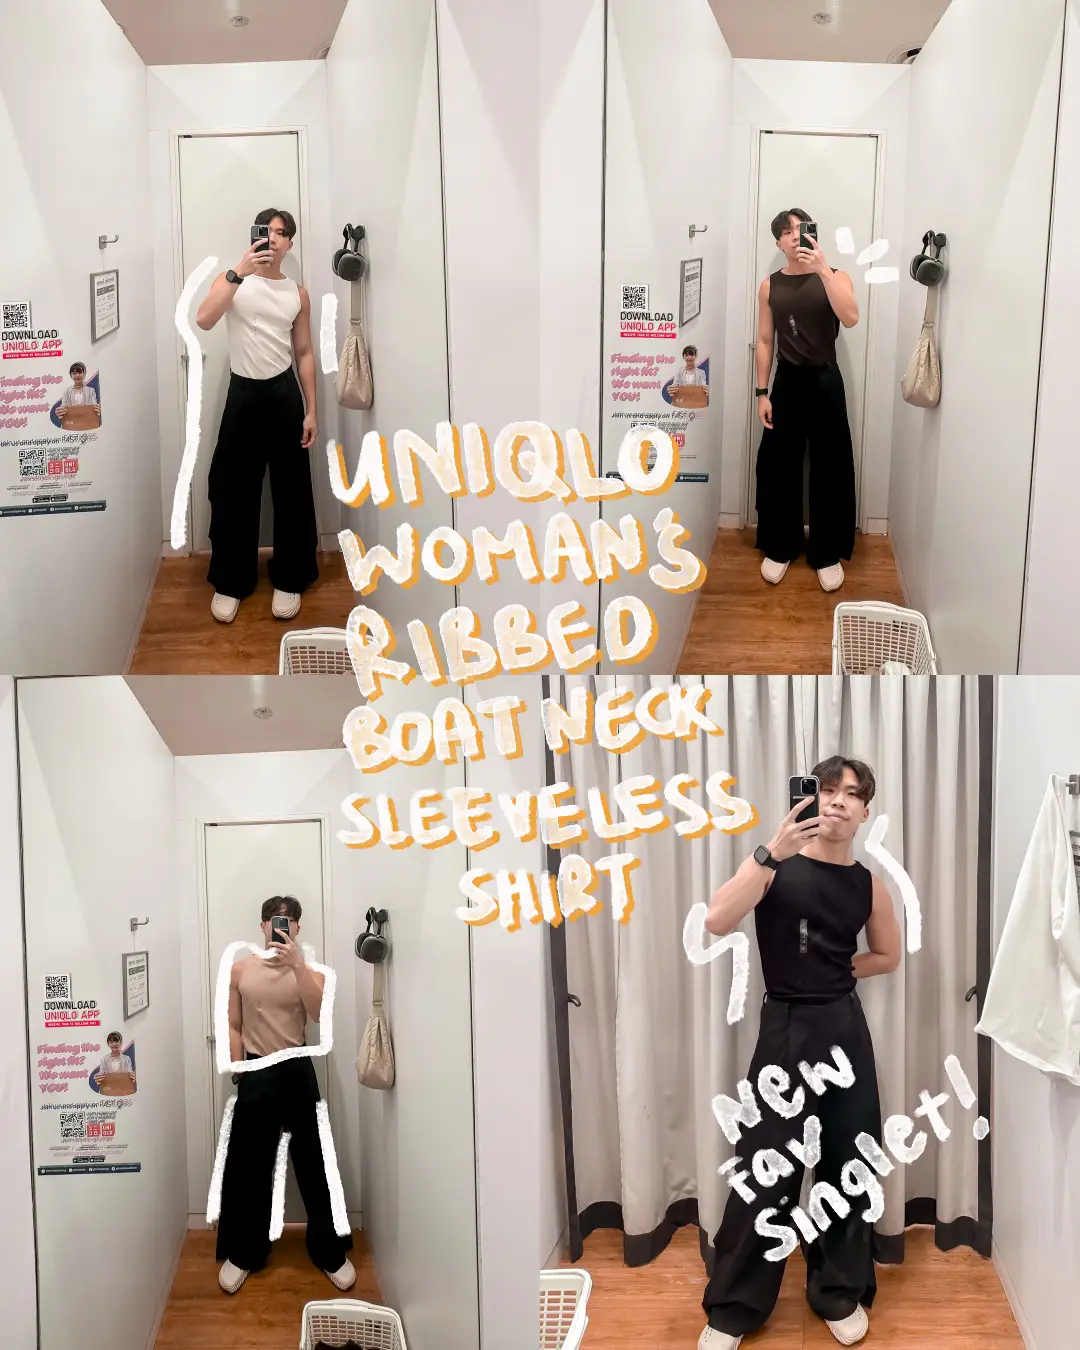 UNIQLO’s new singlet that makes you look SWOLE 💪🏻🦺's images(1)